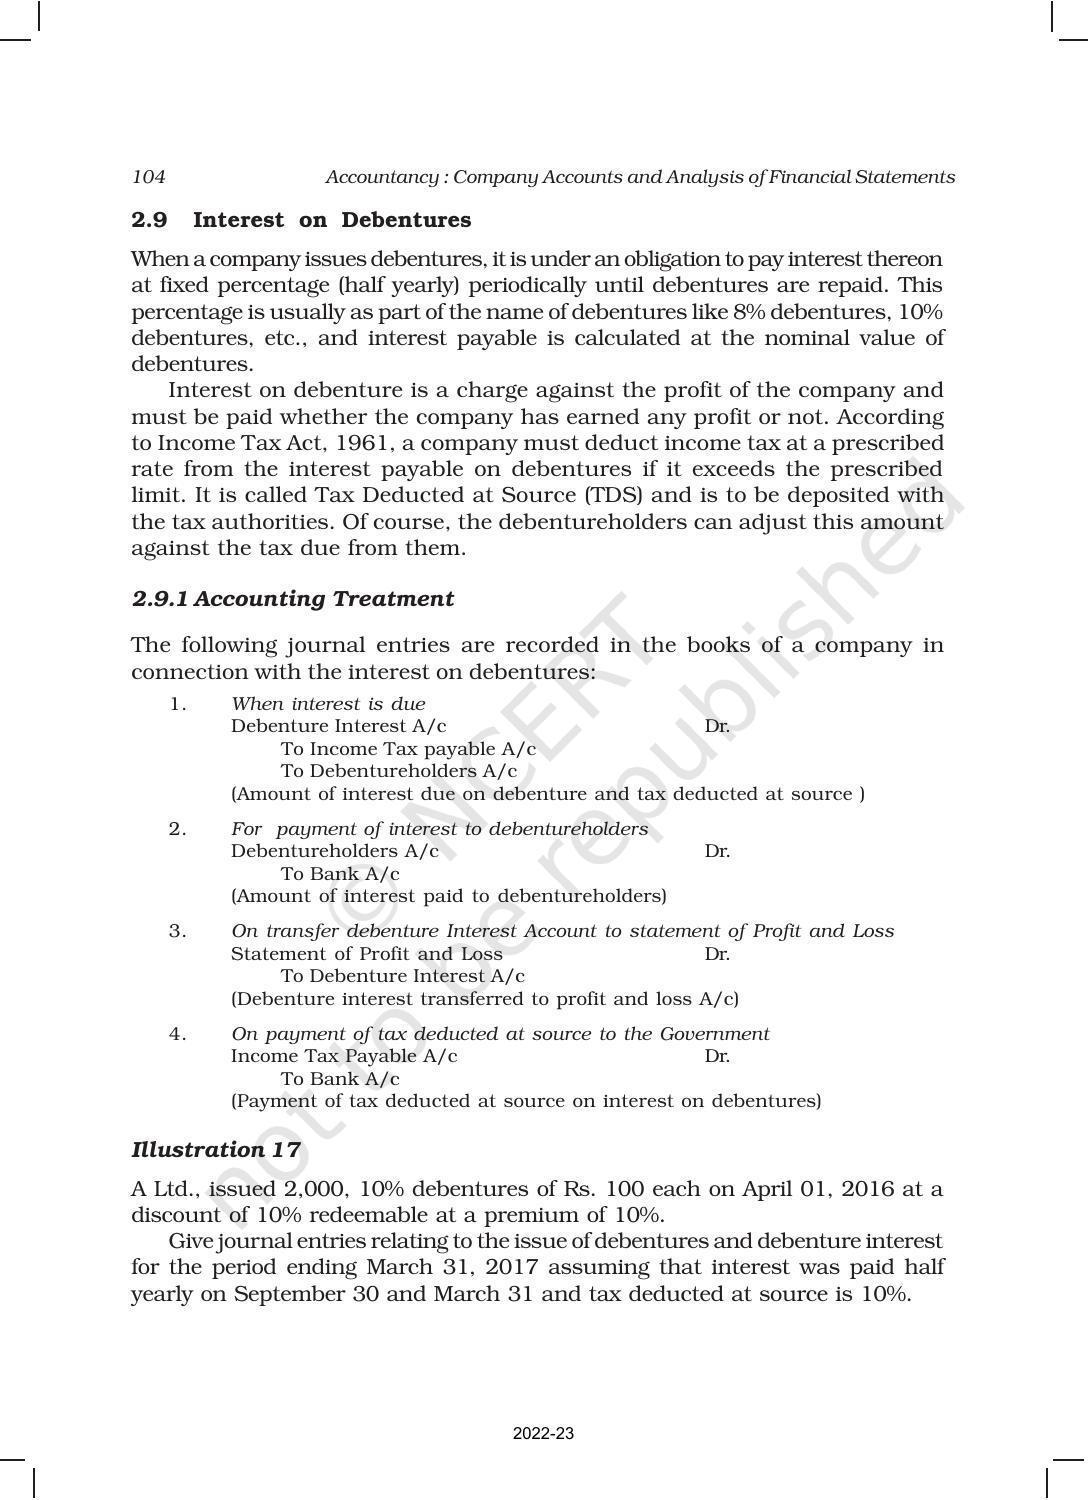 NCERT Book for Class 12 Accountancy Part II Chapter 1 Issue and Redemption of Debentures - Page 30